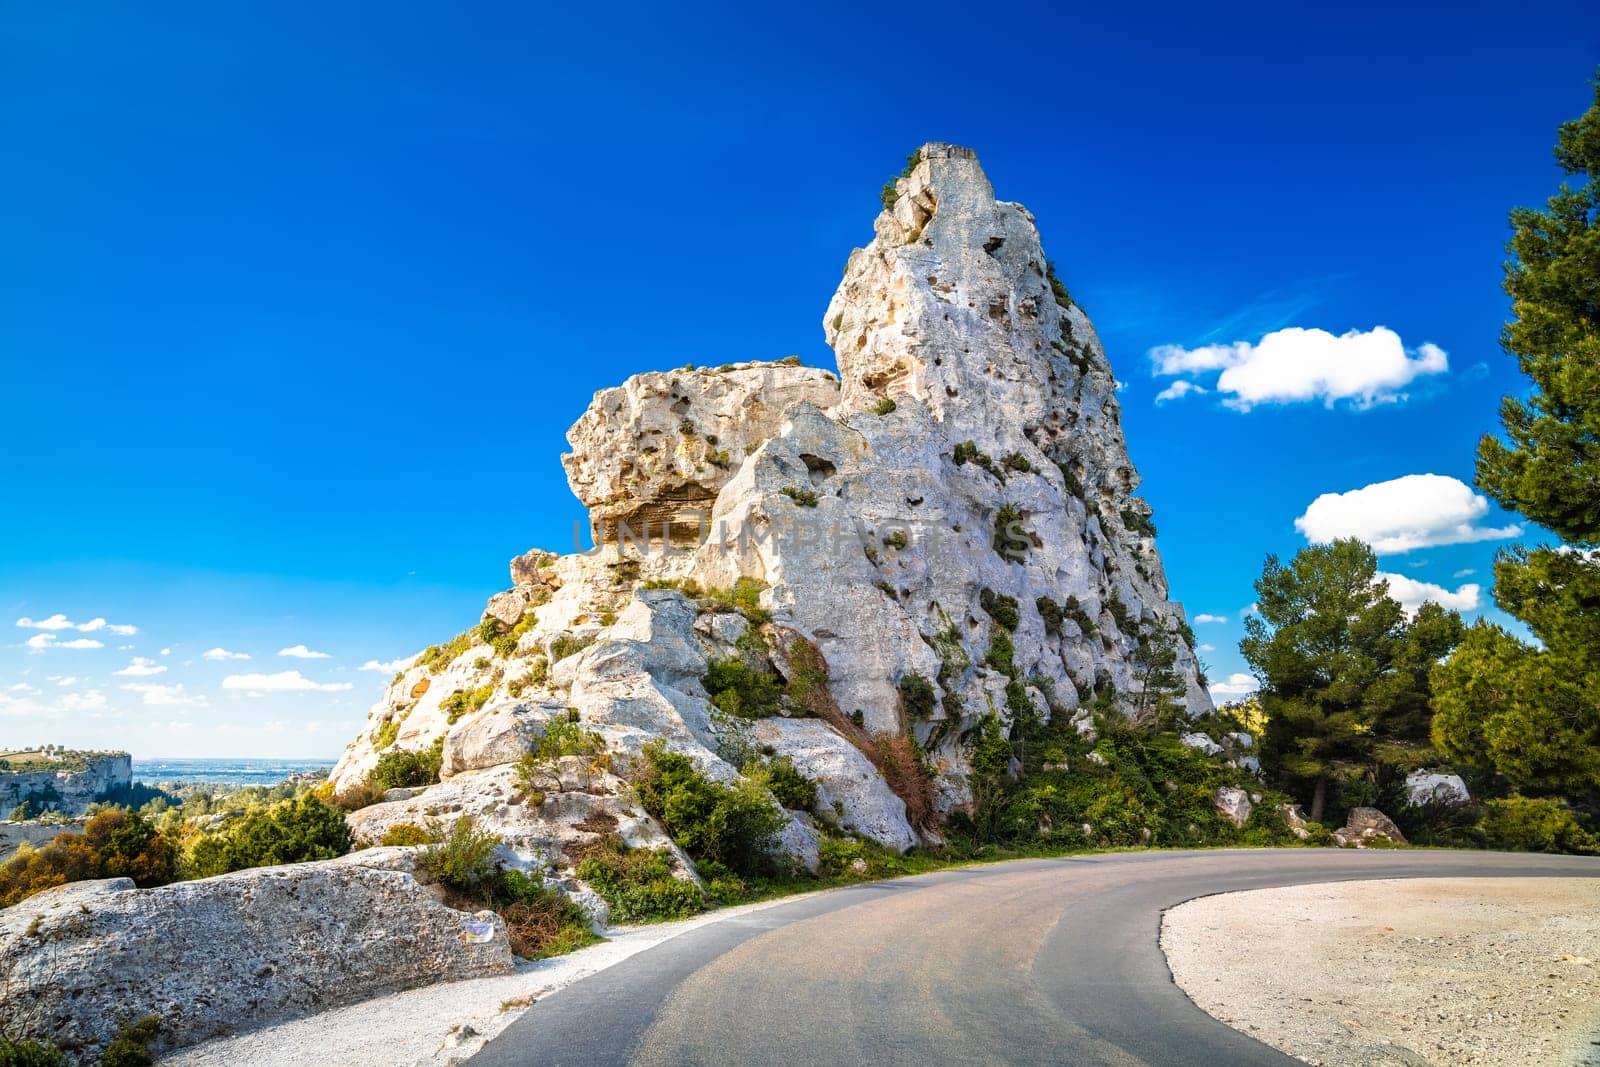 Les Baux de Provence scenic mountain road and rock view, southern France